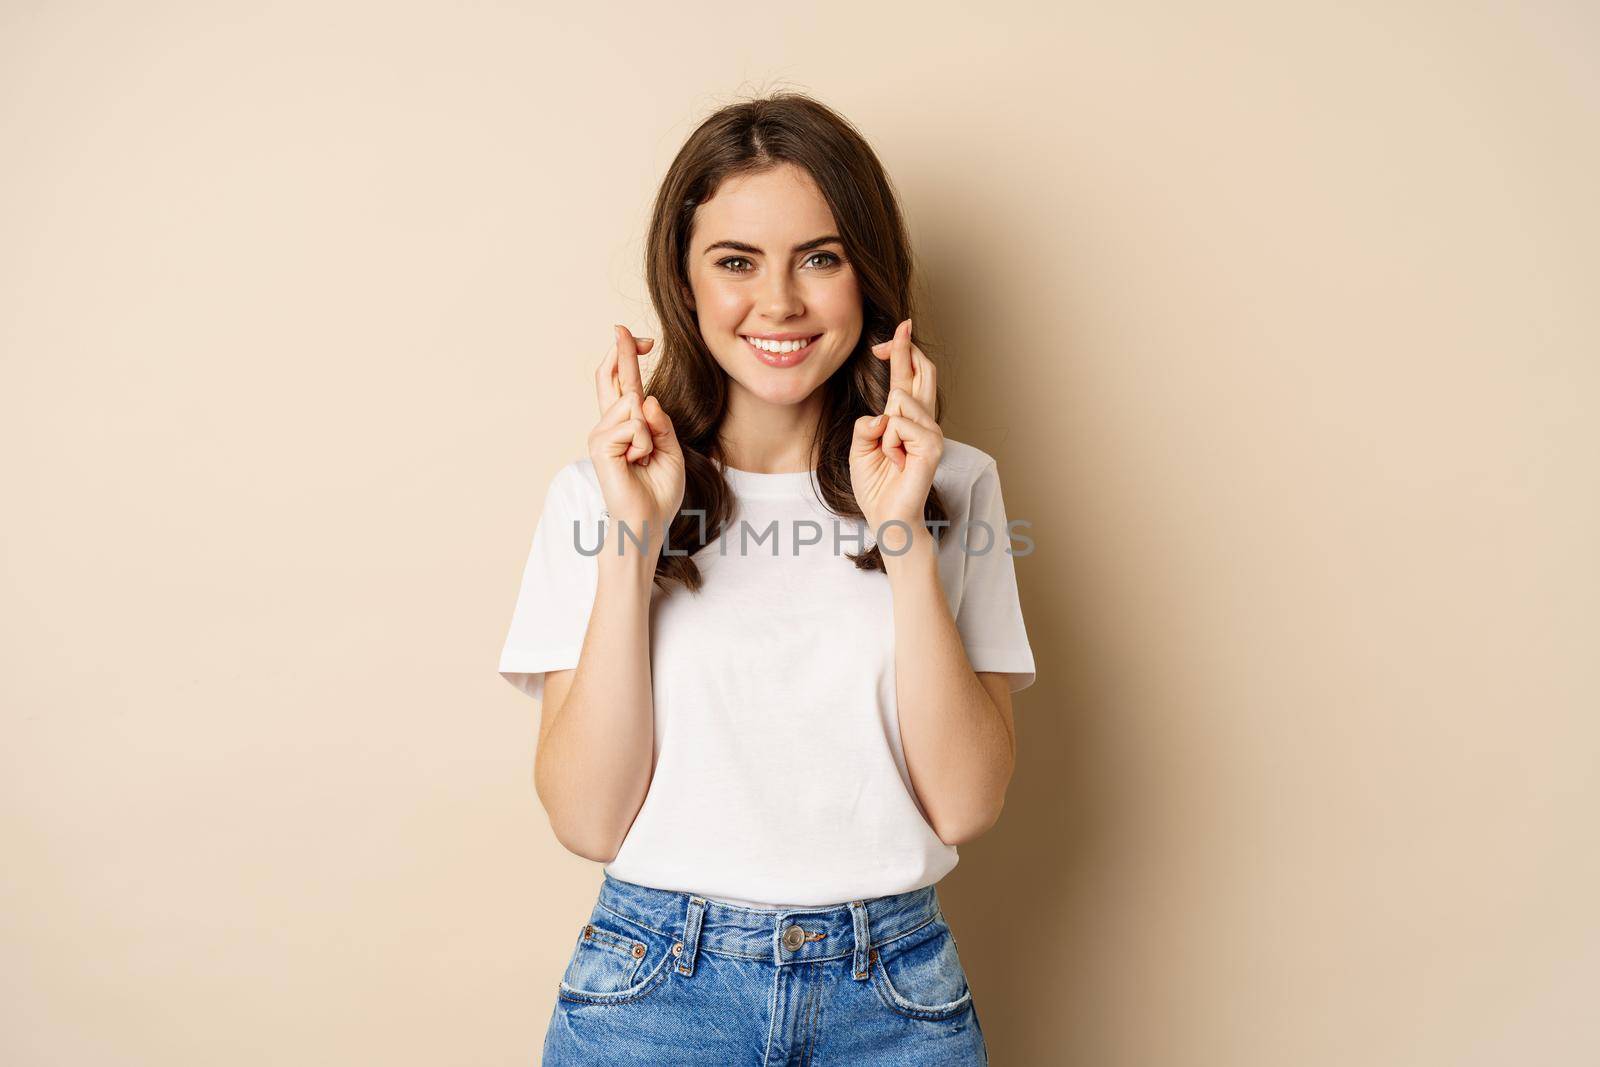 Hopeful woman praying, cross fingers for good luck, making wish, standing over beige background.